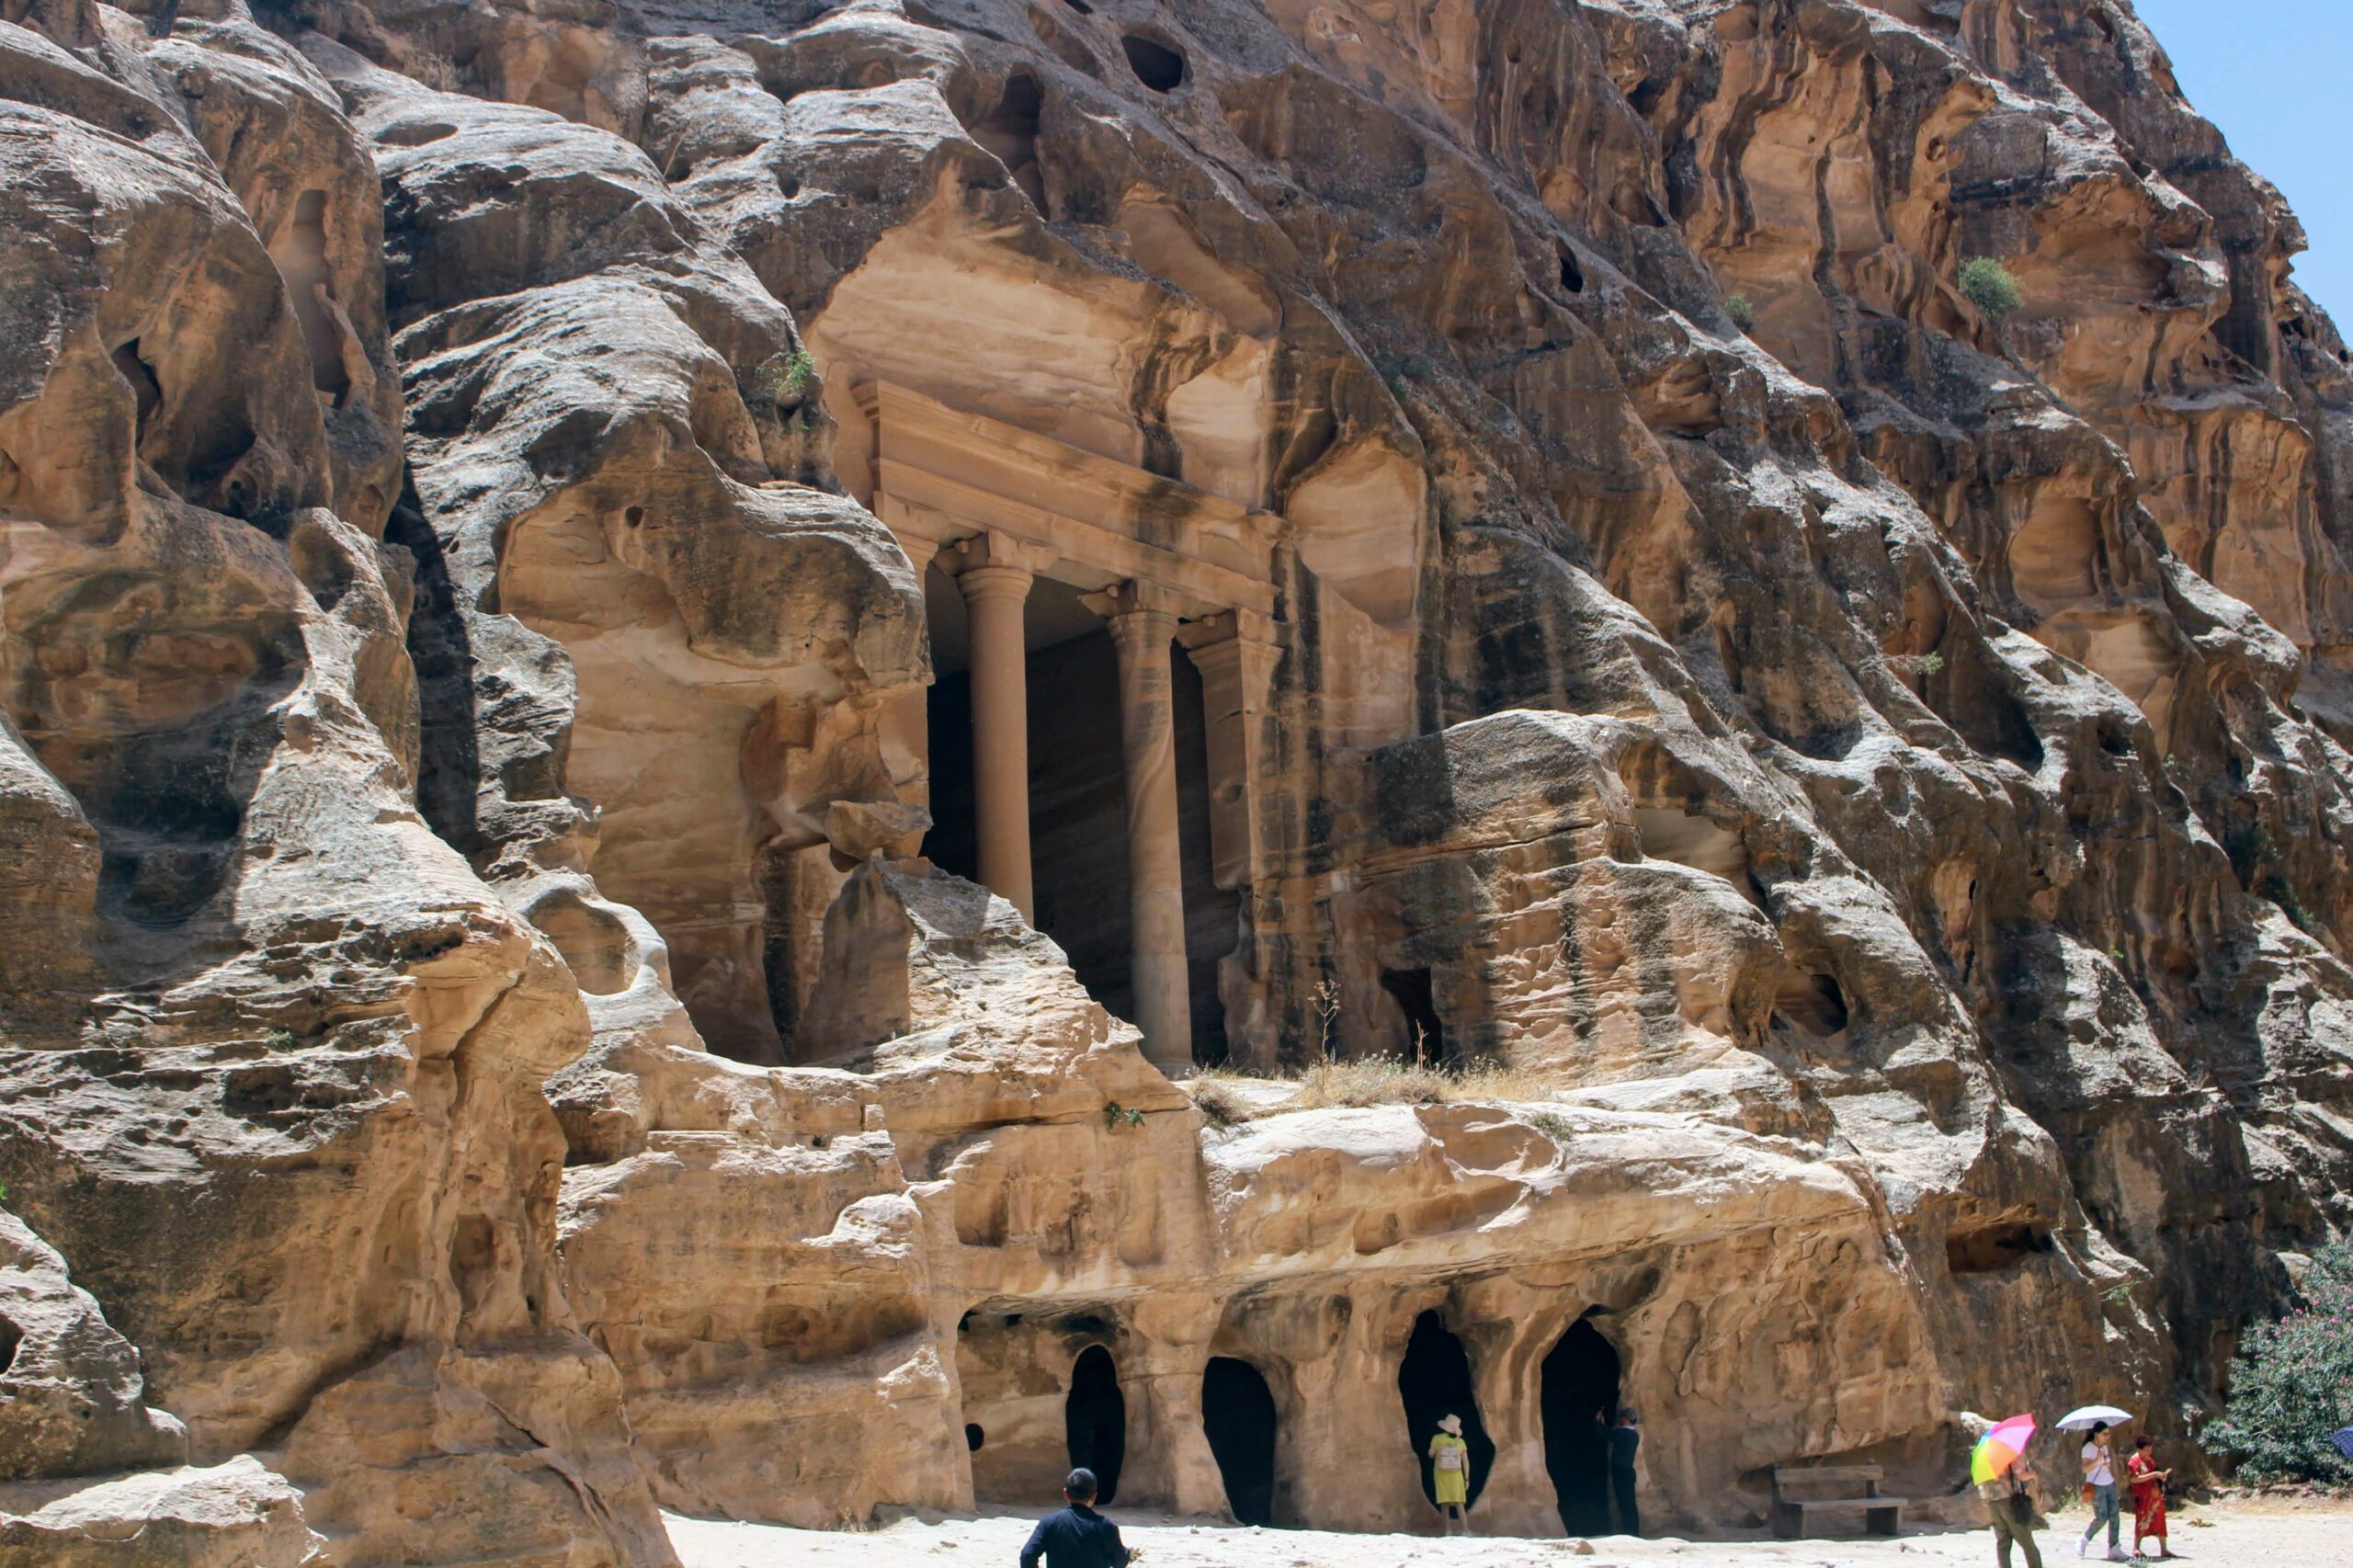 Jordan – Day 4: Drive to Petra (and a visit to Little Petra)